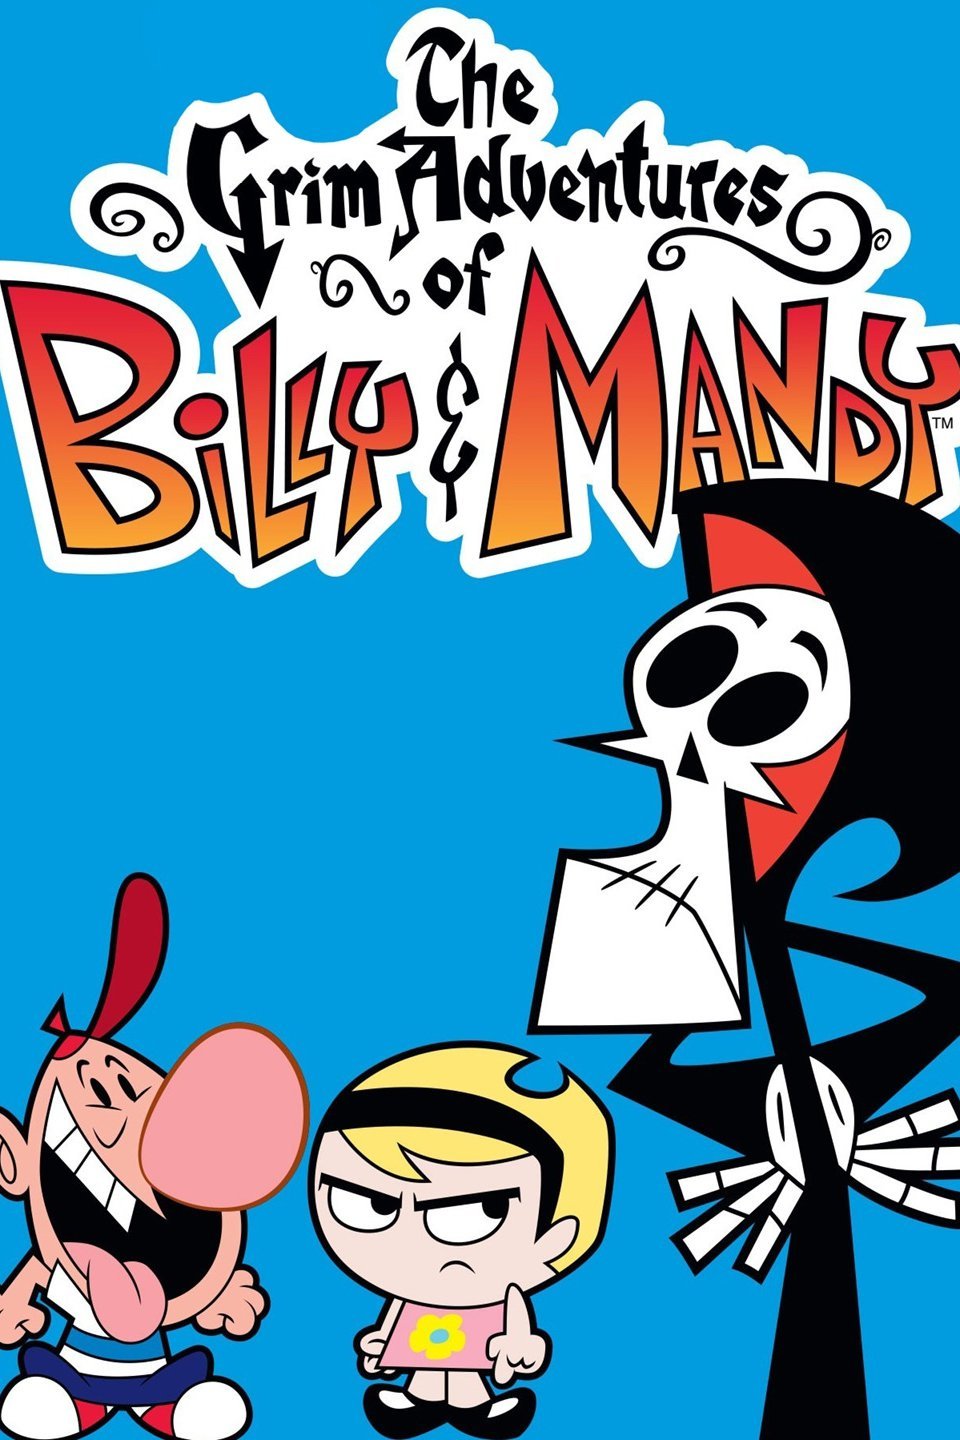 Grim adventures of billy and many